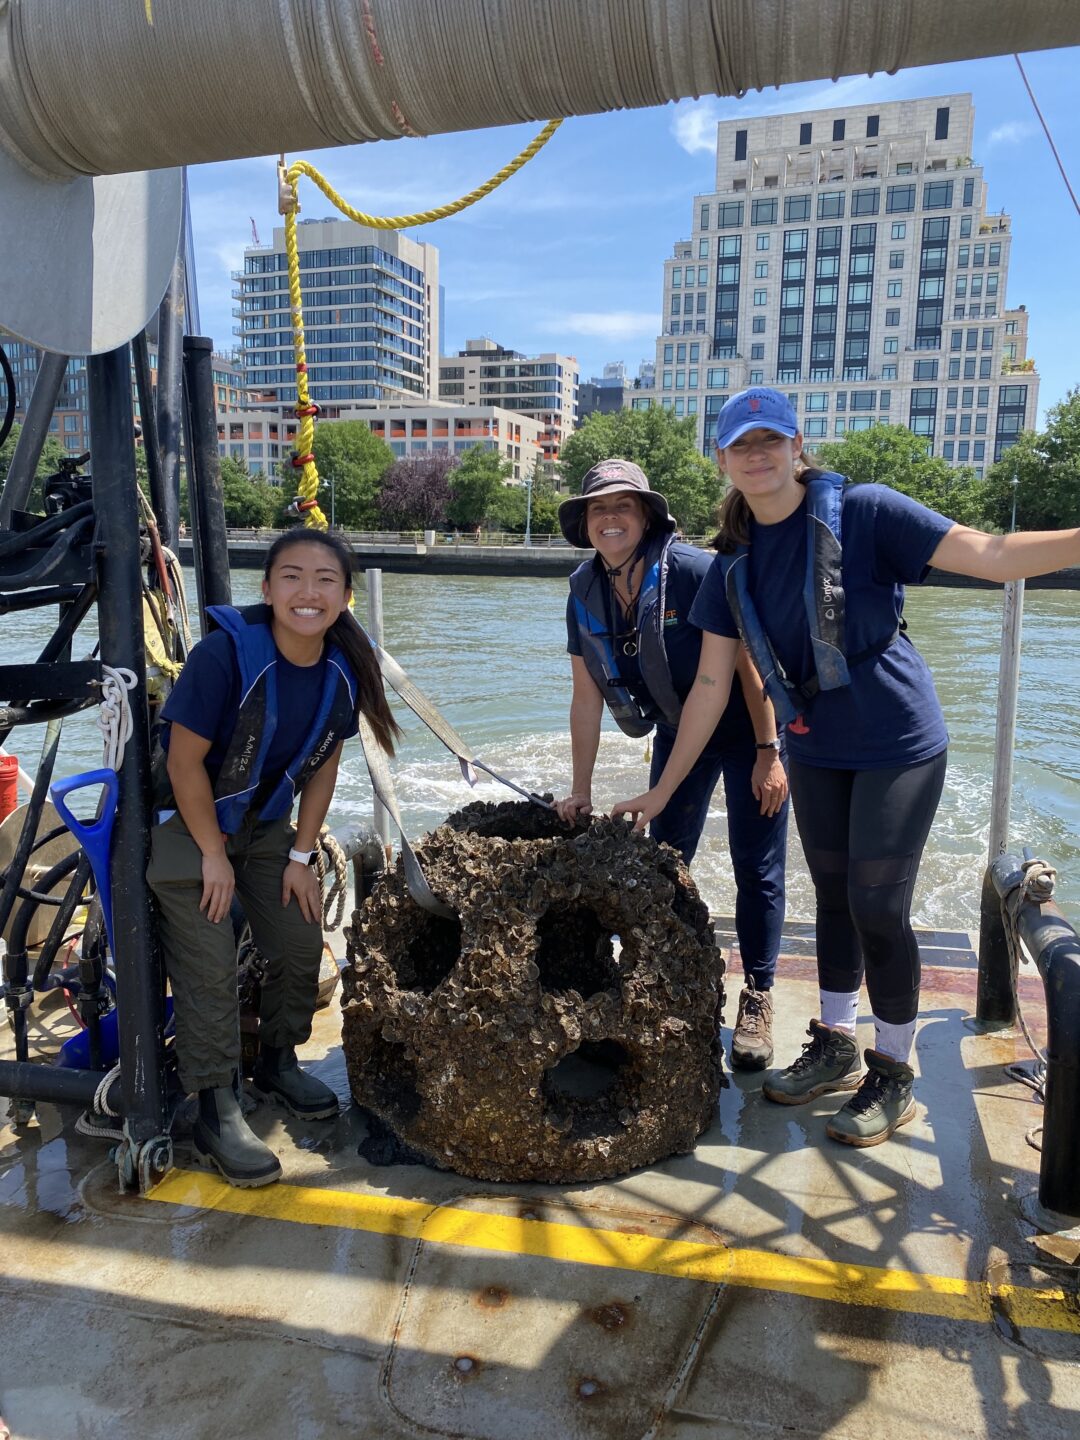 Hudson River Park's River Project team smiles with Reefball covered with oysters photographed during monitoring of Hudson River Park's Habitat Enhancement Project